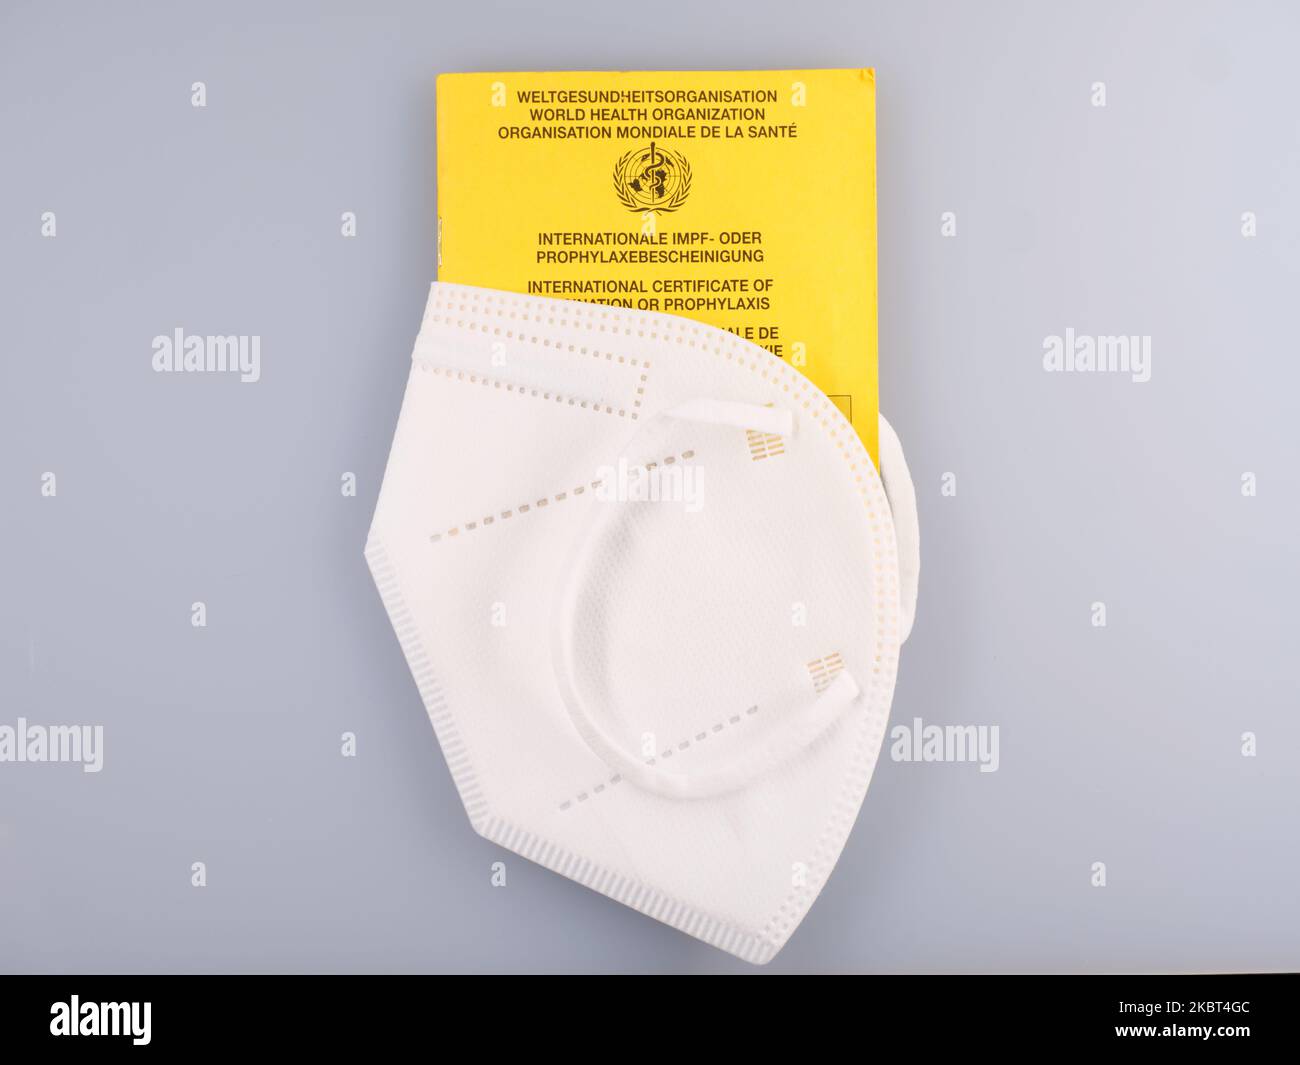 International Vaccination Certificate with Protective Mask. Corona Concept Words on the Certifikate: World Health Organisation + Internation Certifik Stock Photo